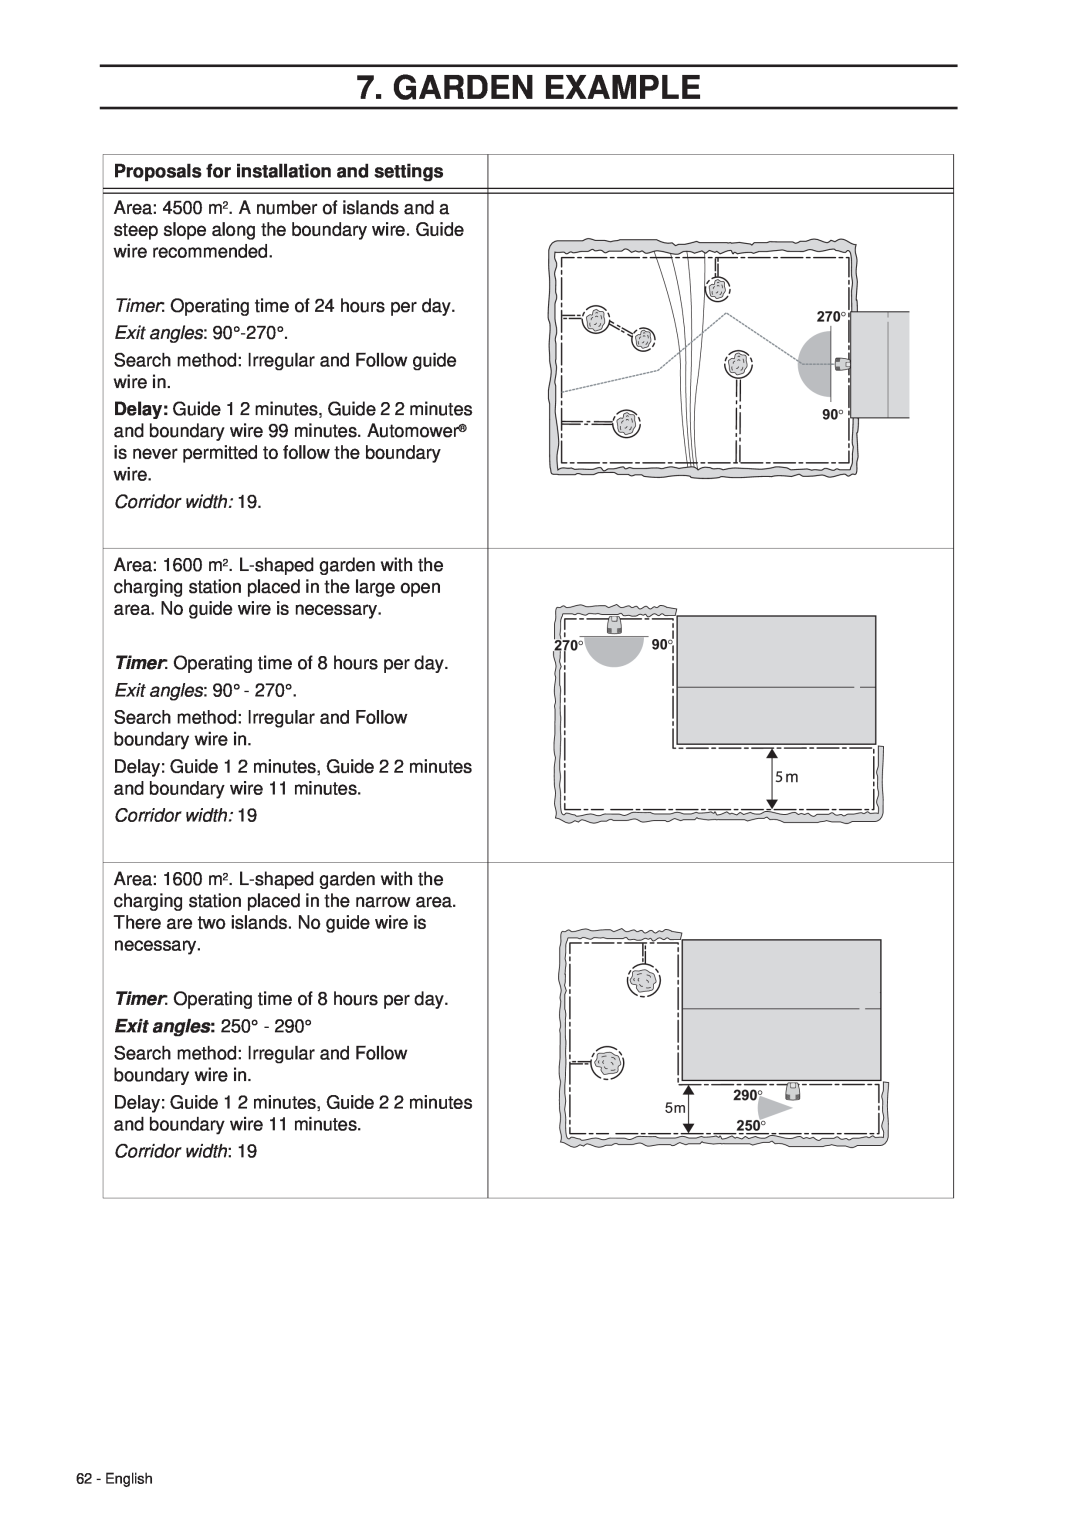 Husqvarna 265 ACX manual Exit angles, Garden Example, Proposals for installation and settings, English 